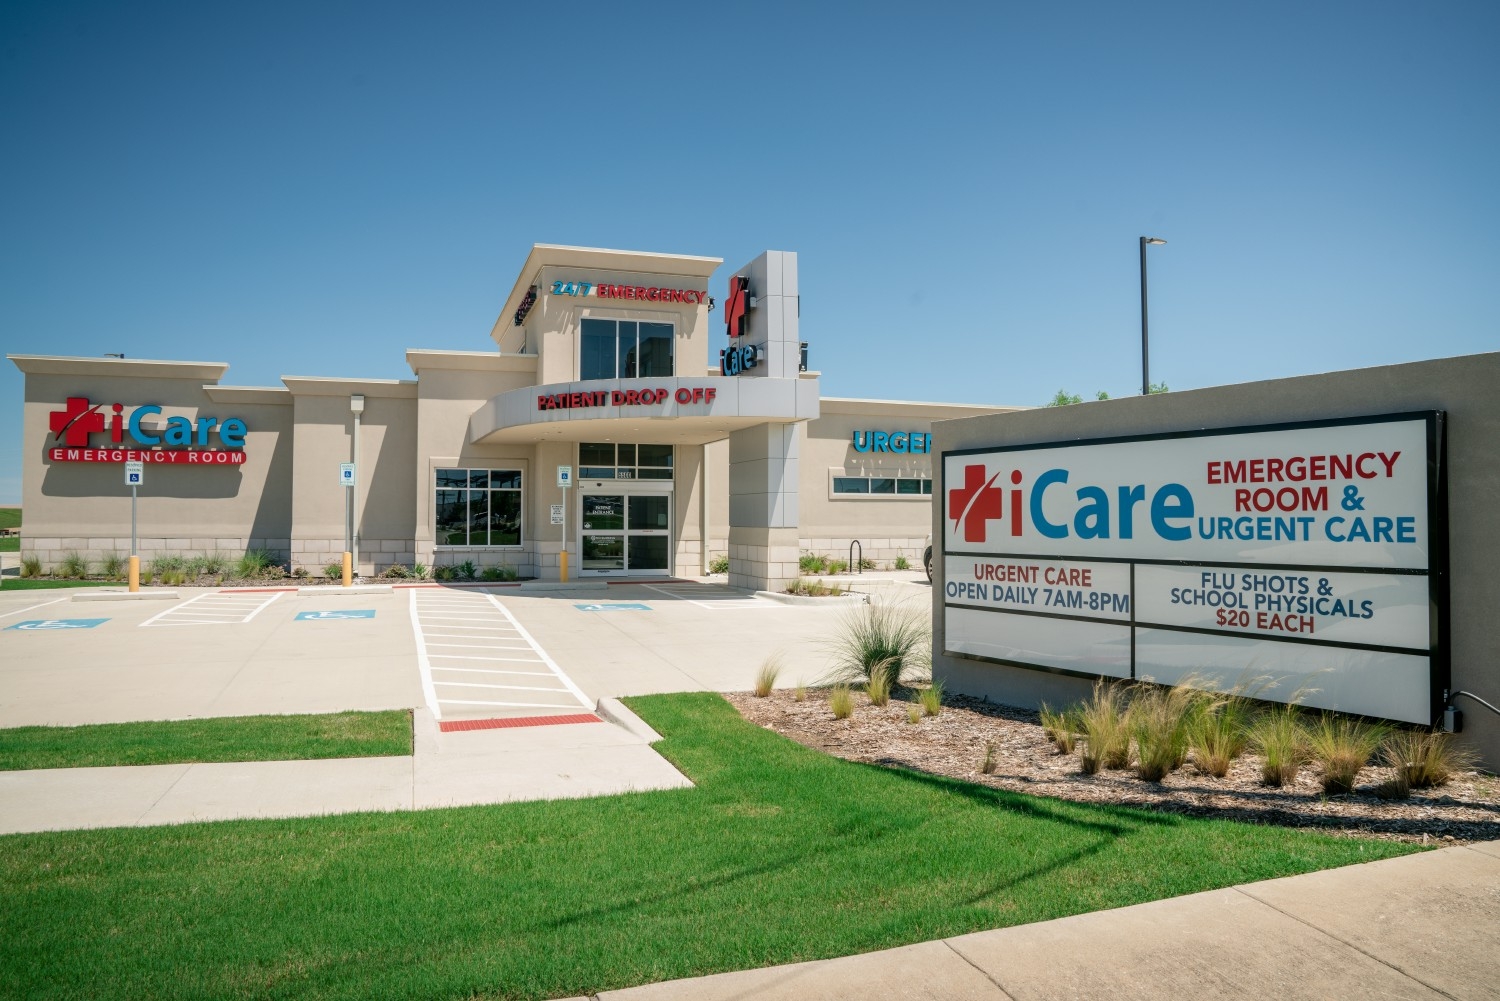 iCare Emergency Room & Urgent Care. Fort Worth, TX